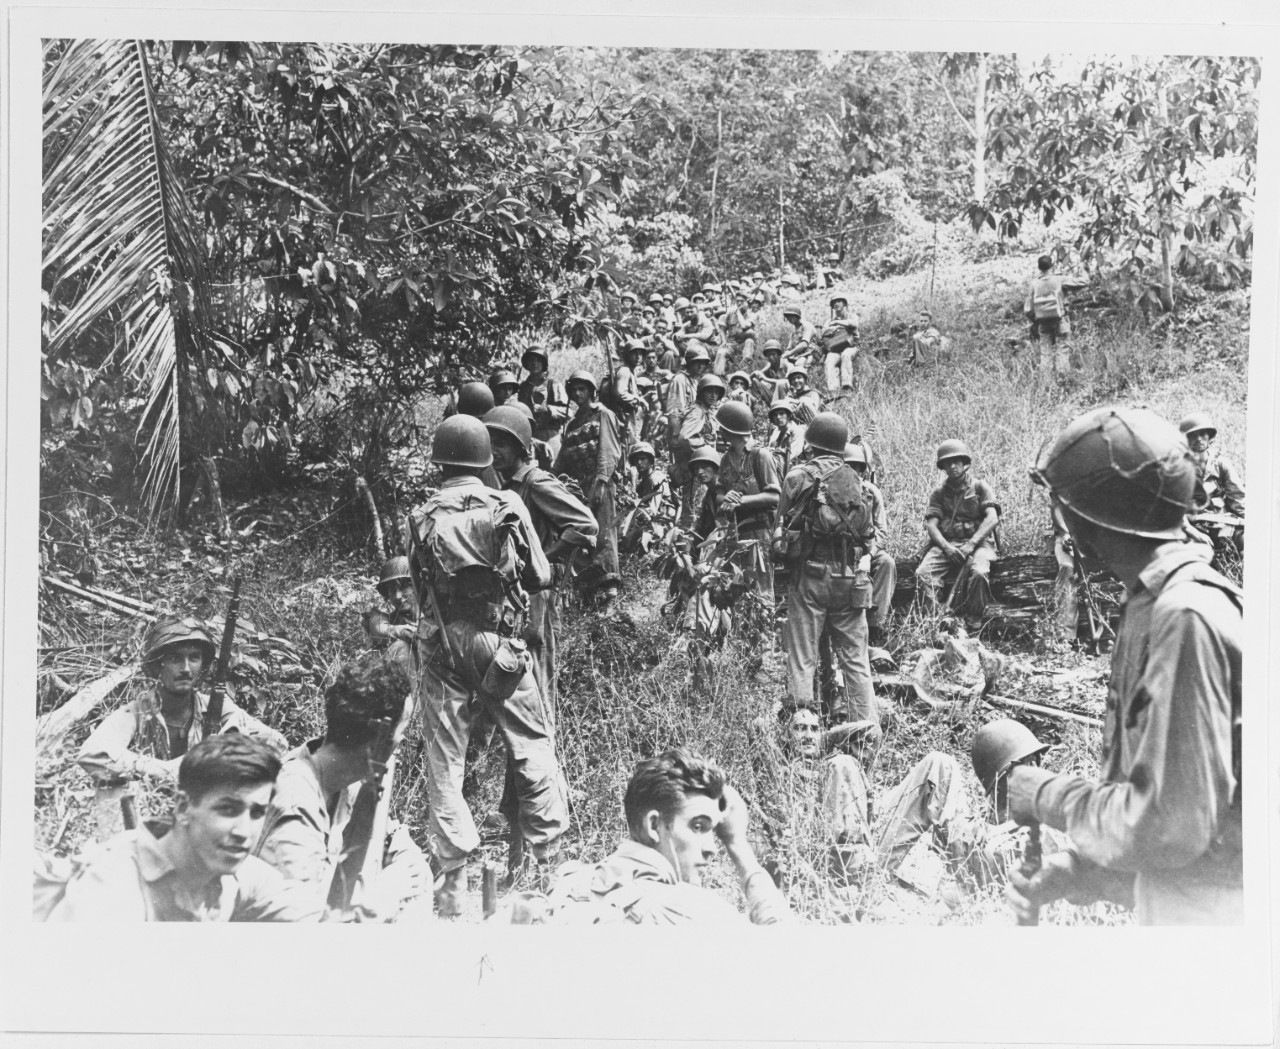 Photo #: 80-G-20683  Guadalcanal Campaign, August 1942 -- February 1943